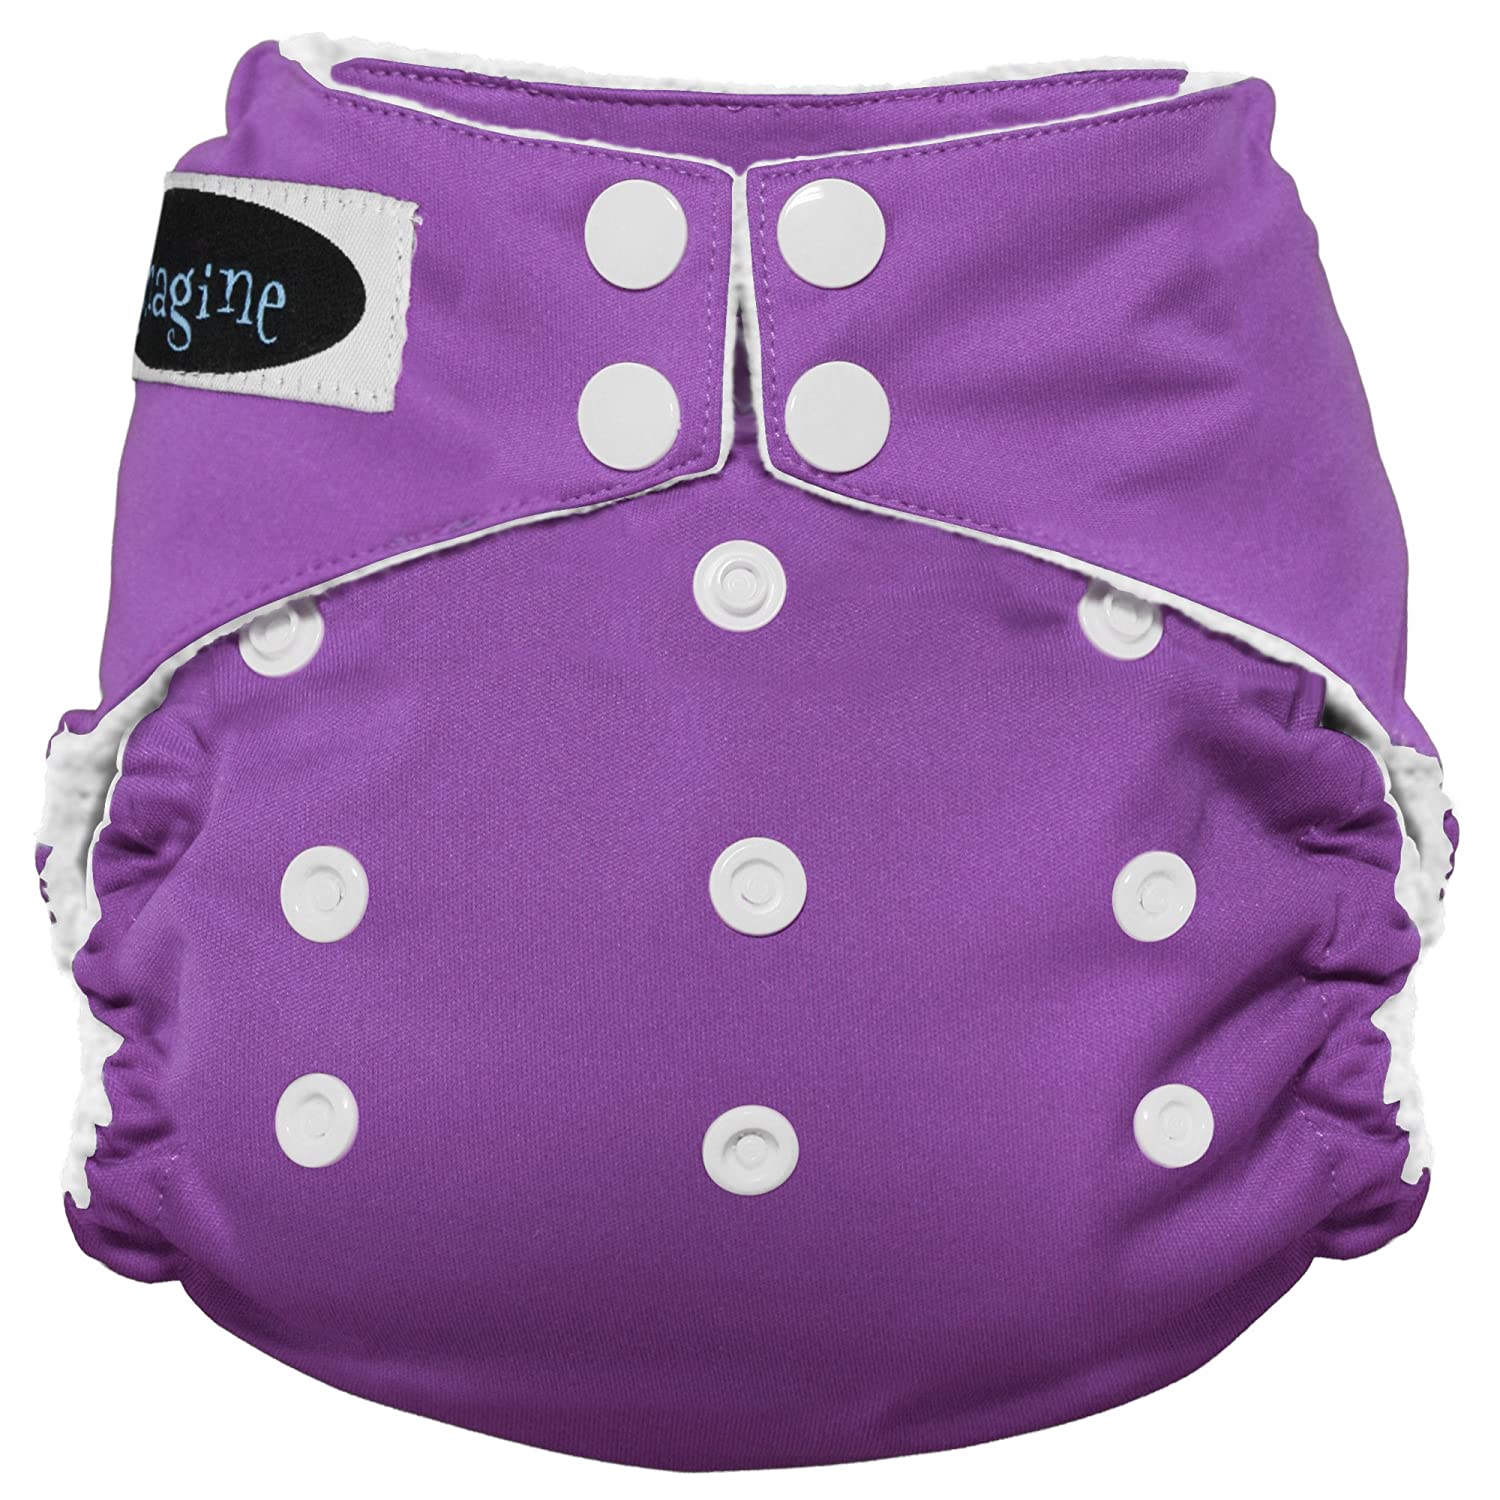 8 Best Cheap AIO Cloth Diapers 2023 - Buying Guide 1